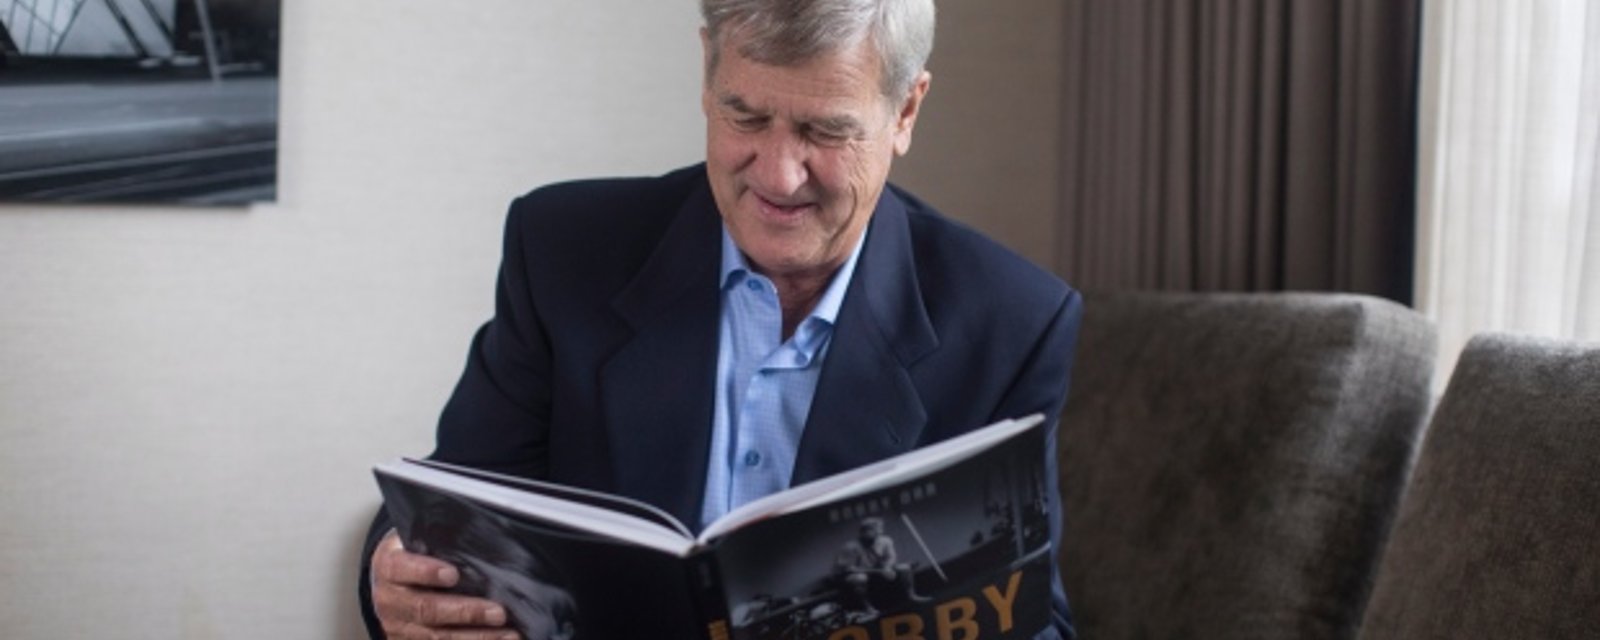 A must read for Bruins fans: Bobby Orr's new book